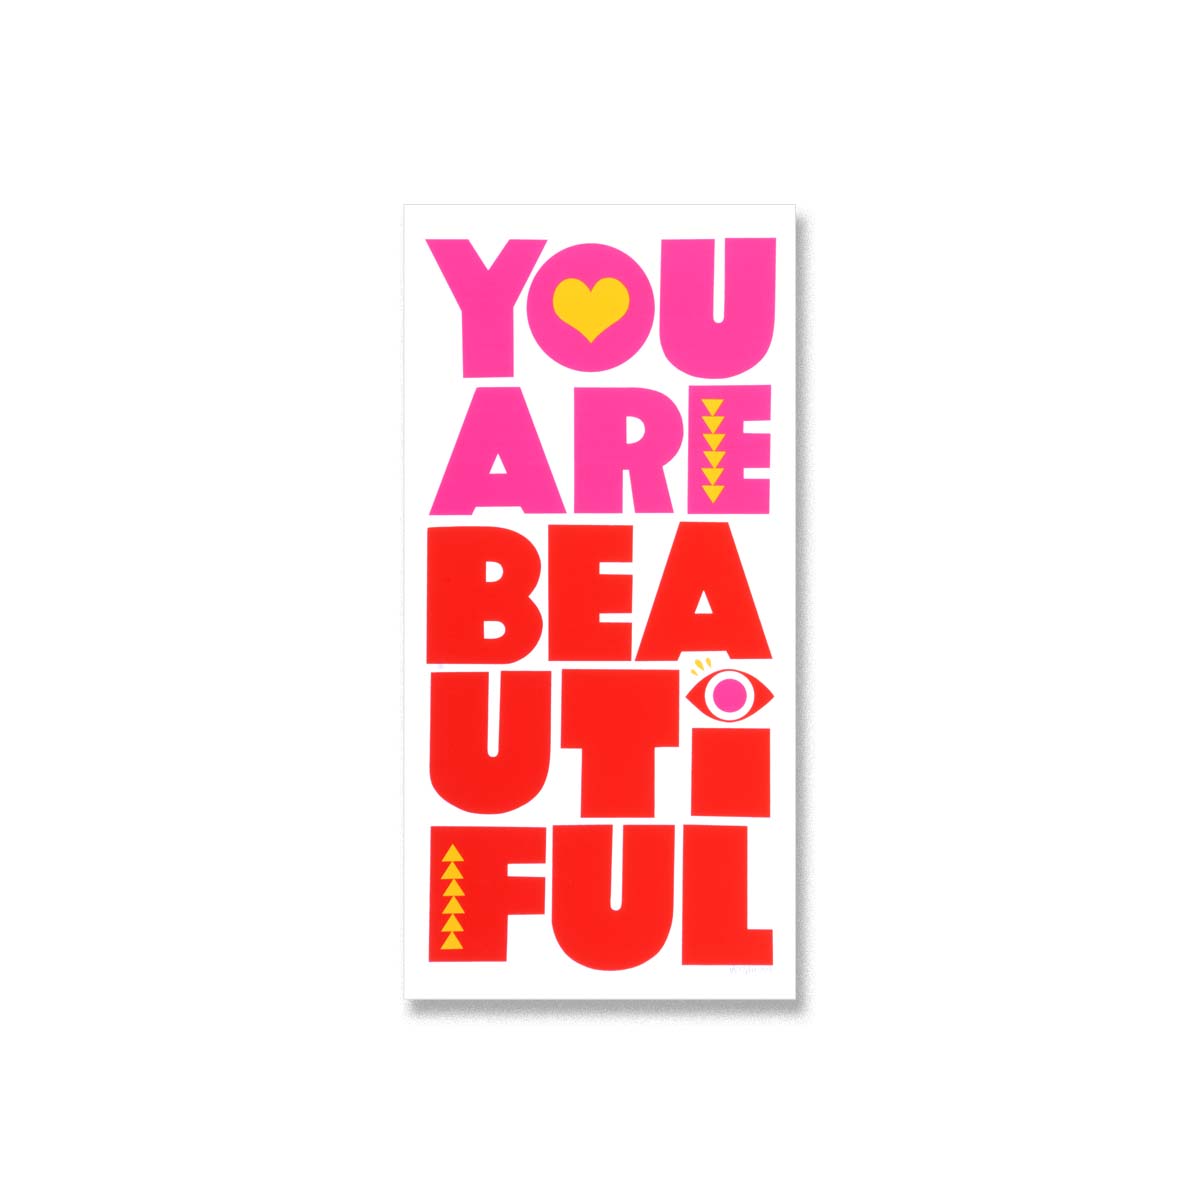 You Are Beautiful - Limited Edition Serigraph